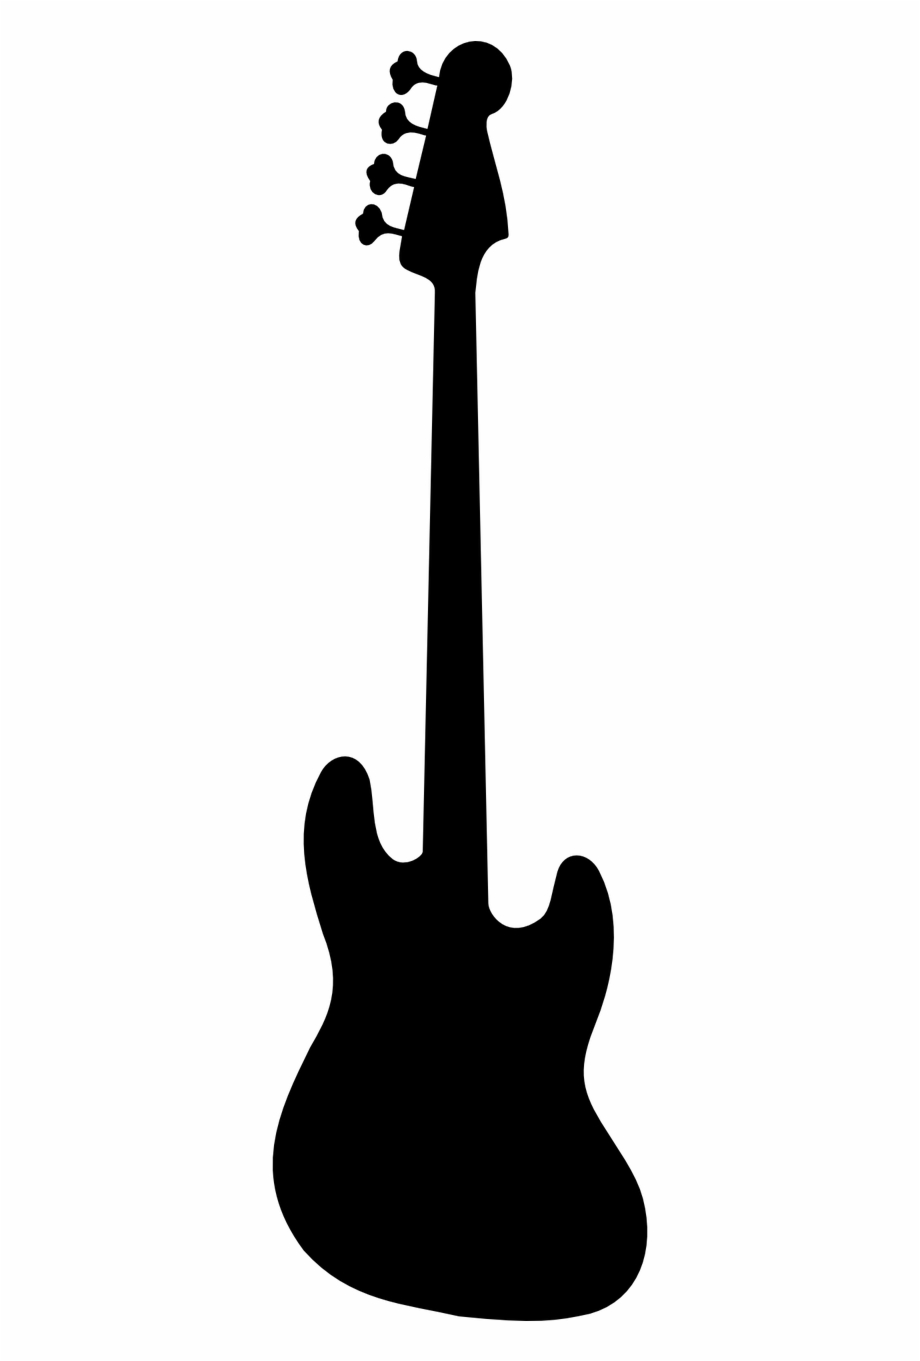 Free Silhouette Acoustic Guitar, Download Free Clip Art